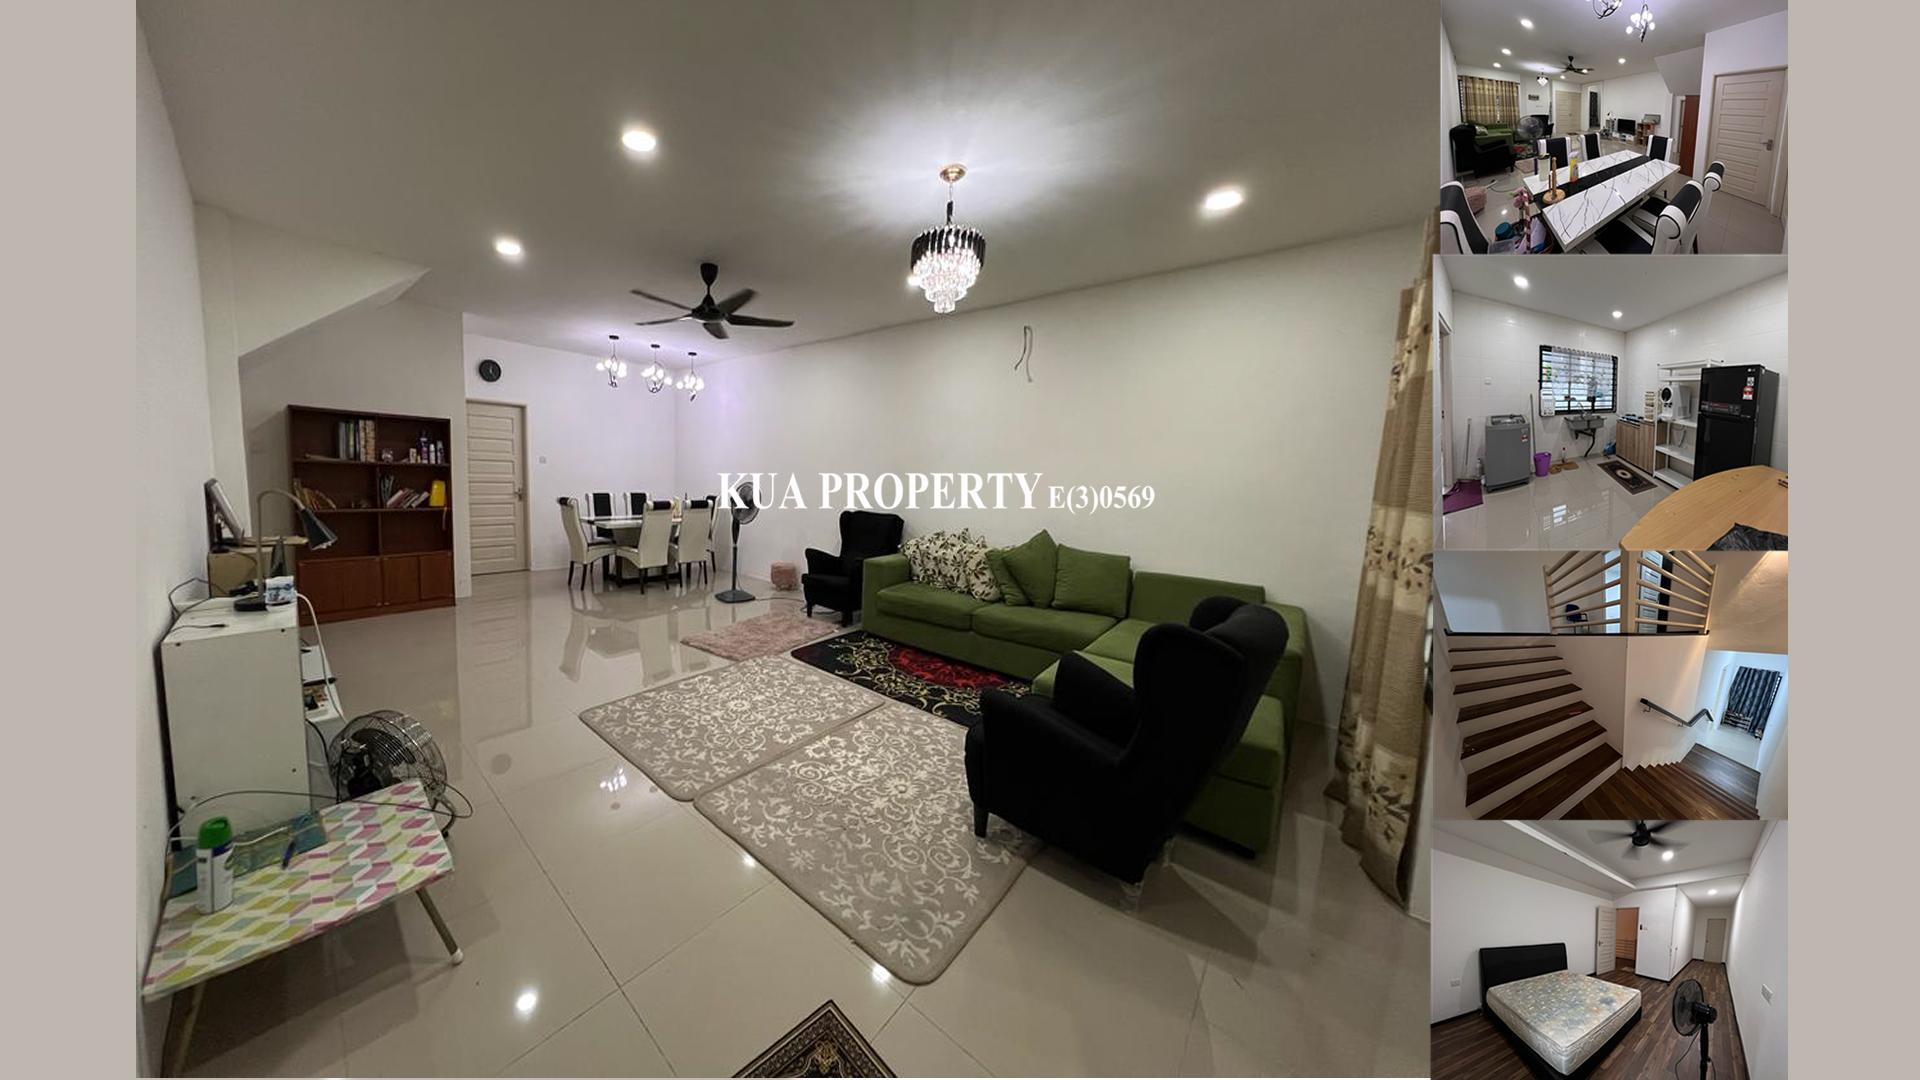 Double Storey Terrace Intermediate House For Rent at Aurora Heights, Moyan